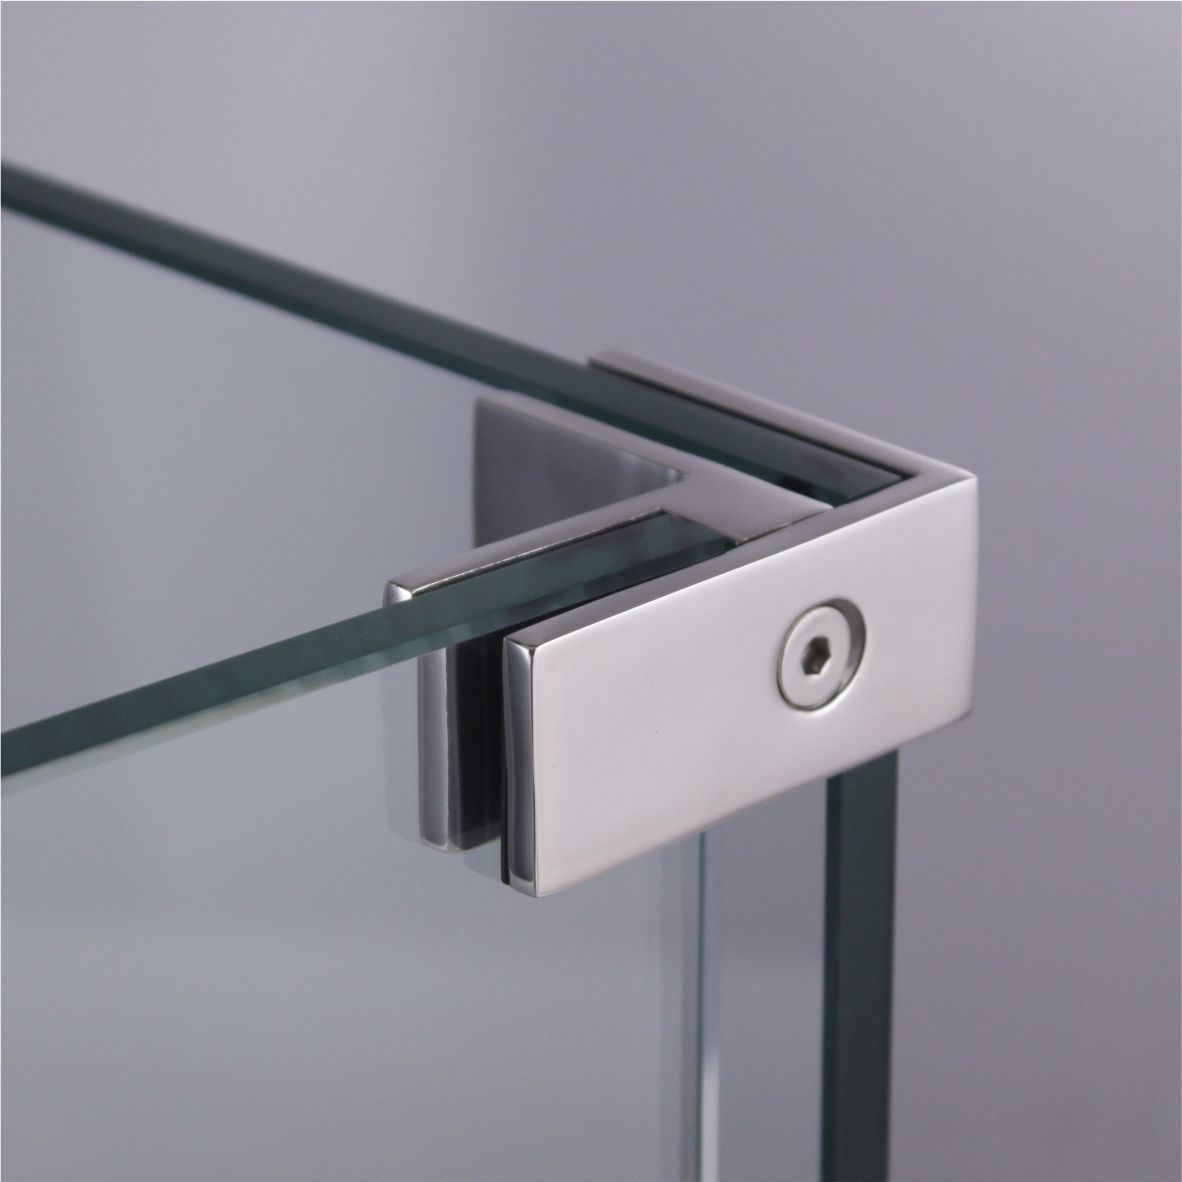 Balustrading Support Clamps manufacturers